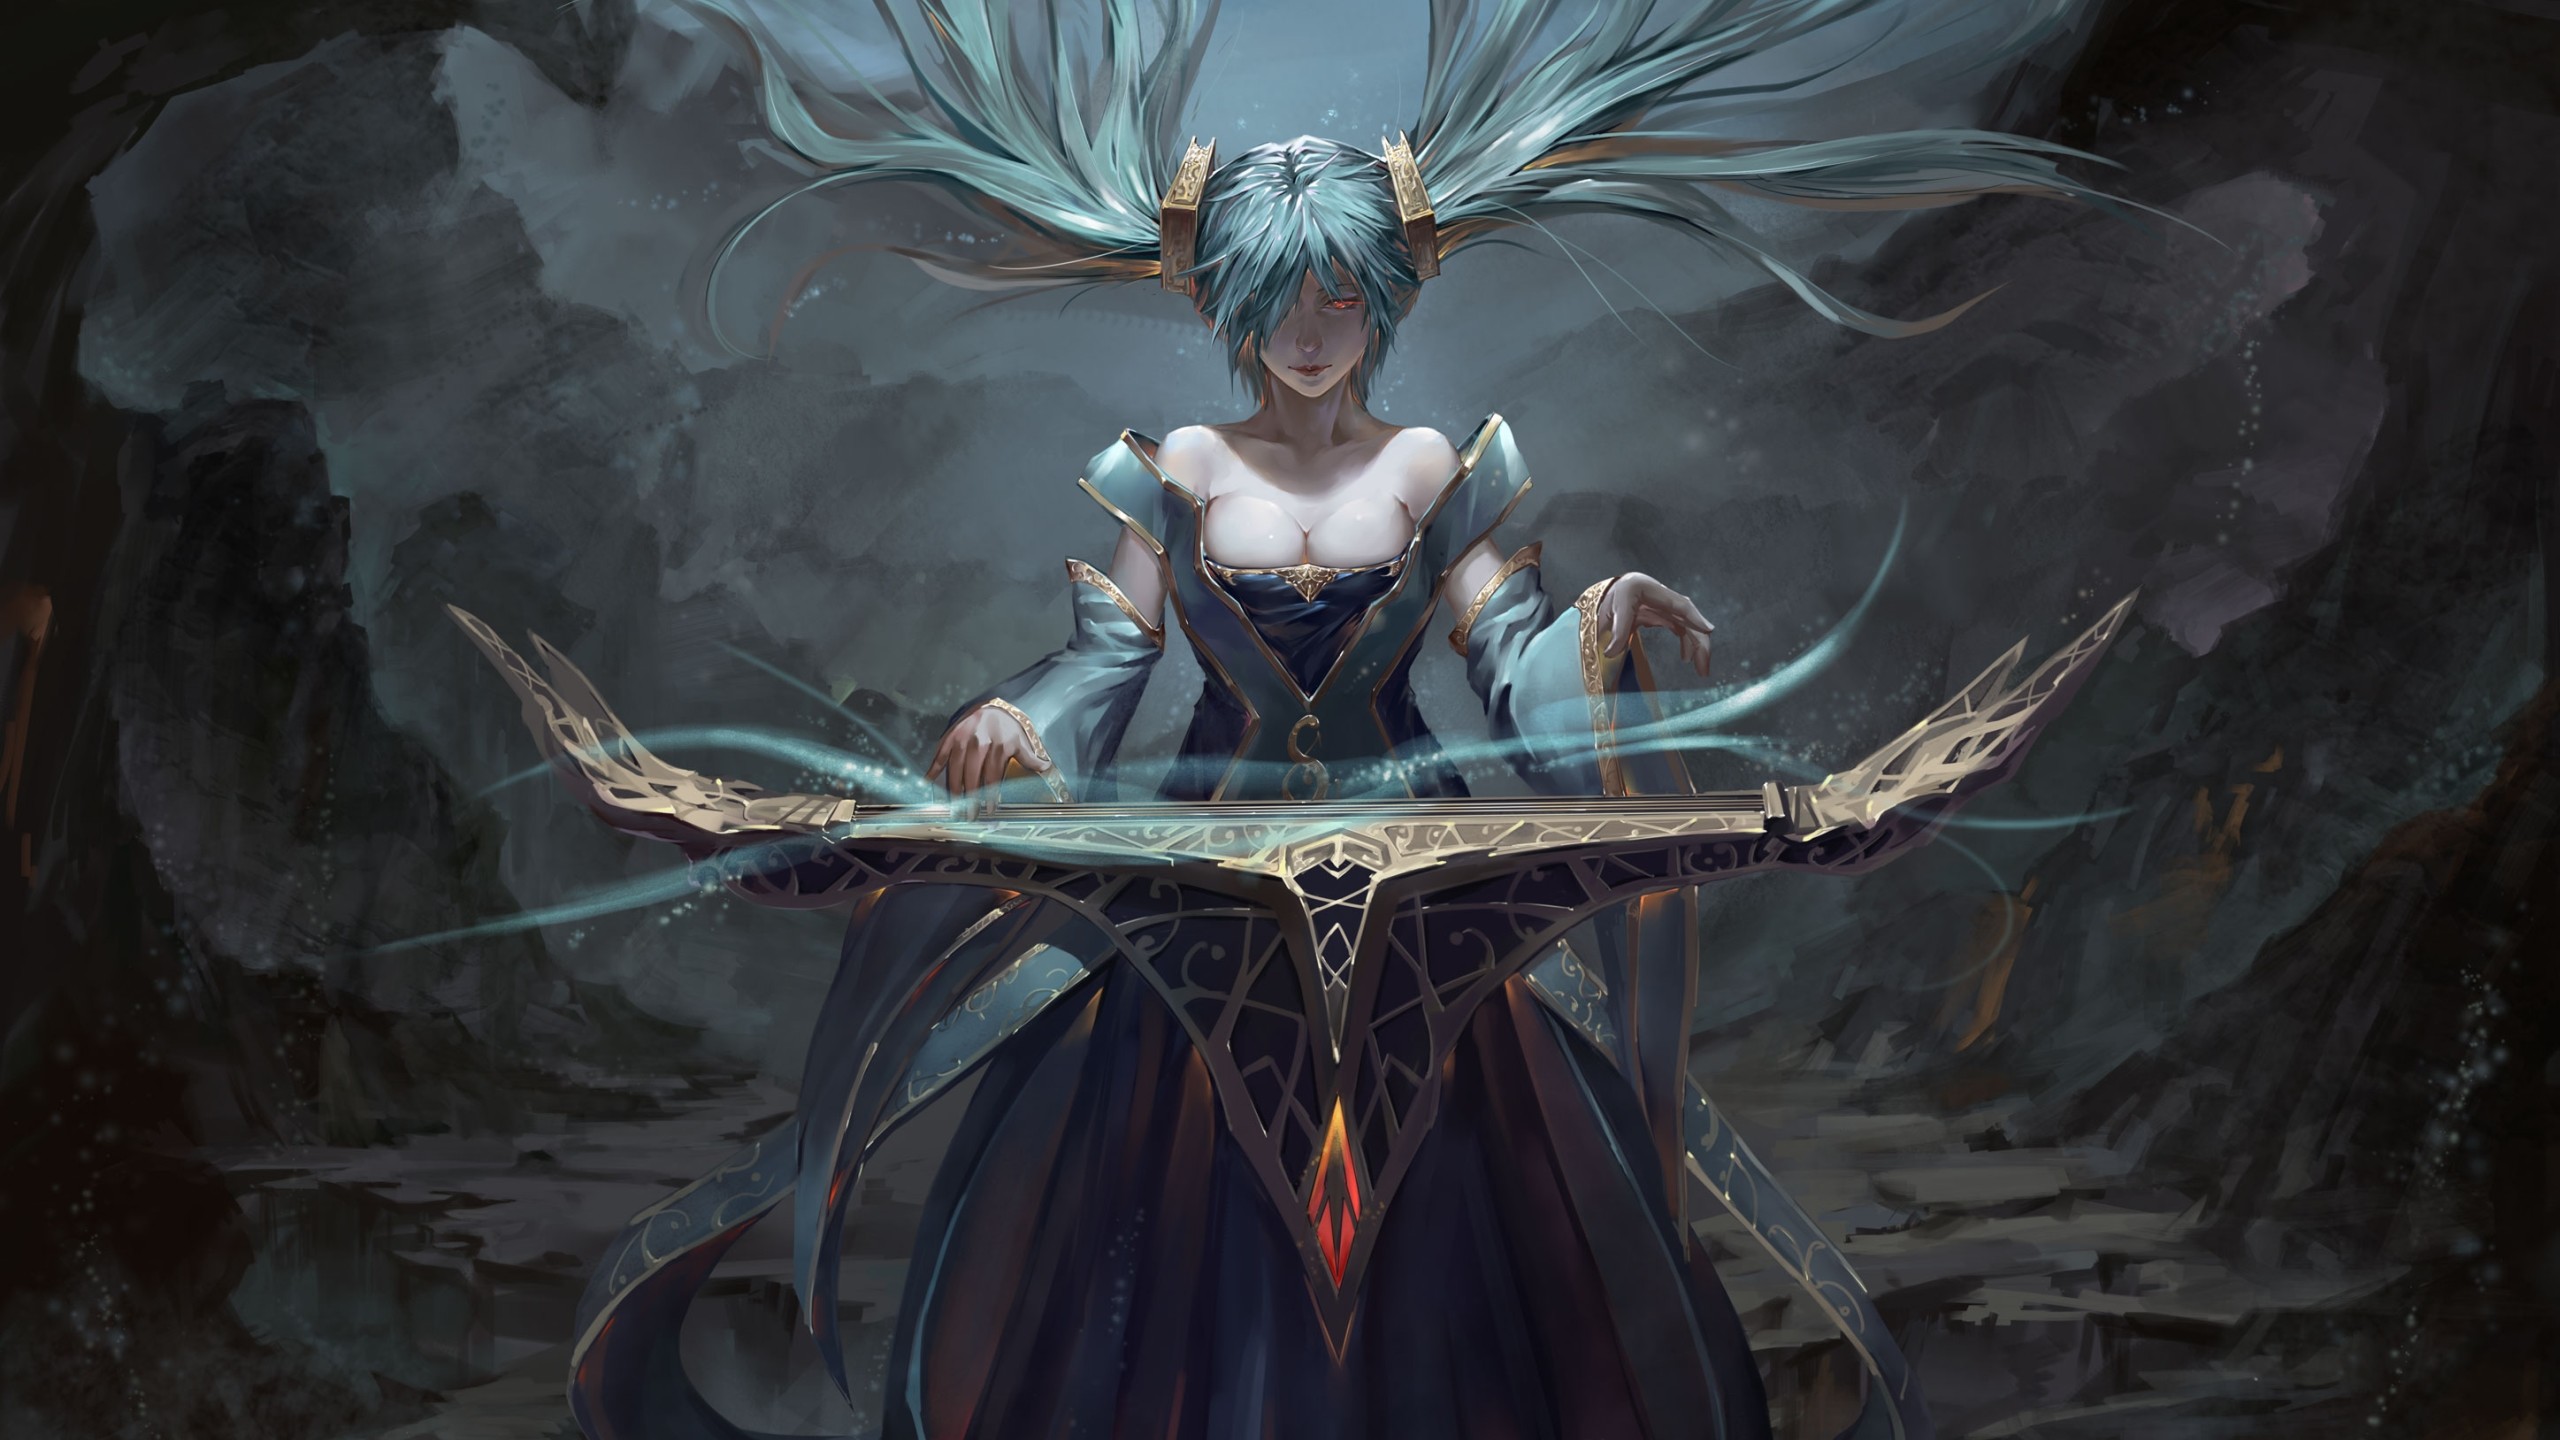 2560x1440 HD & Widescreen wallpaper of Sona Buvelle from the League of Legends video  game series -